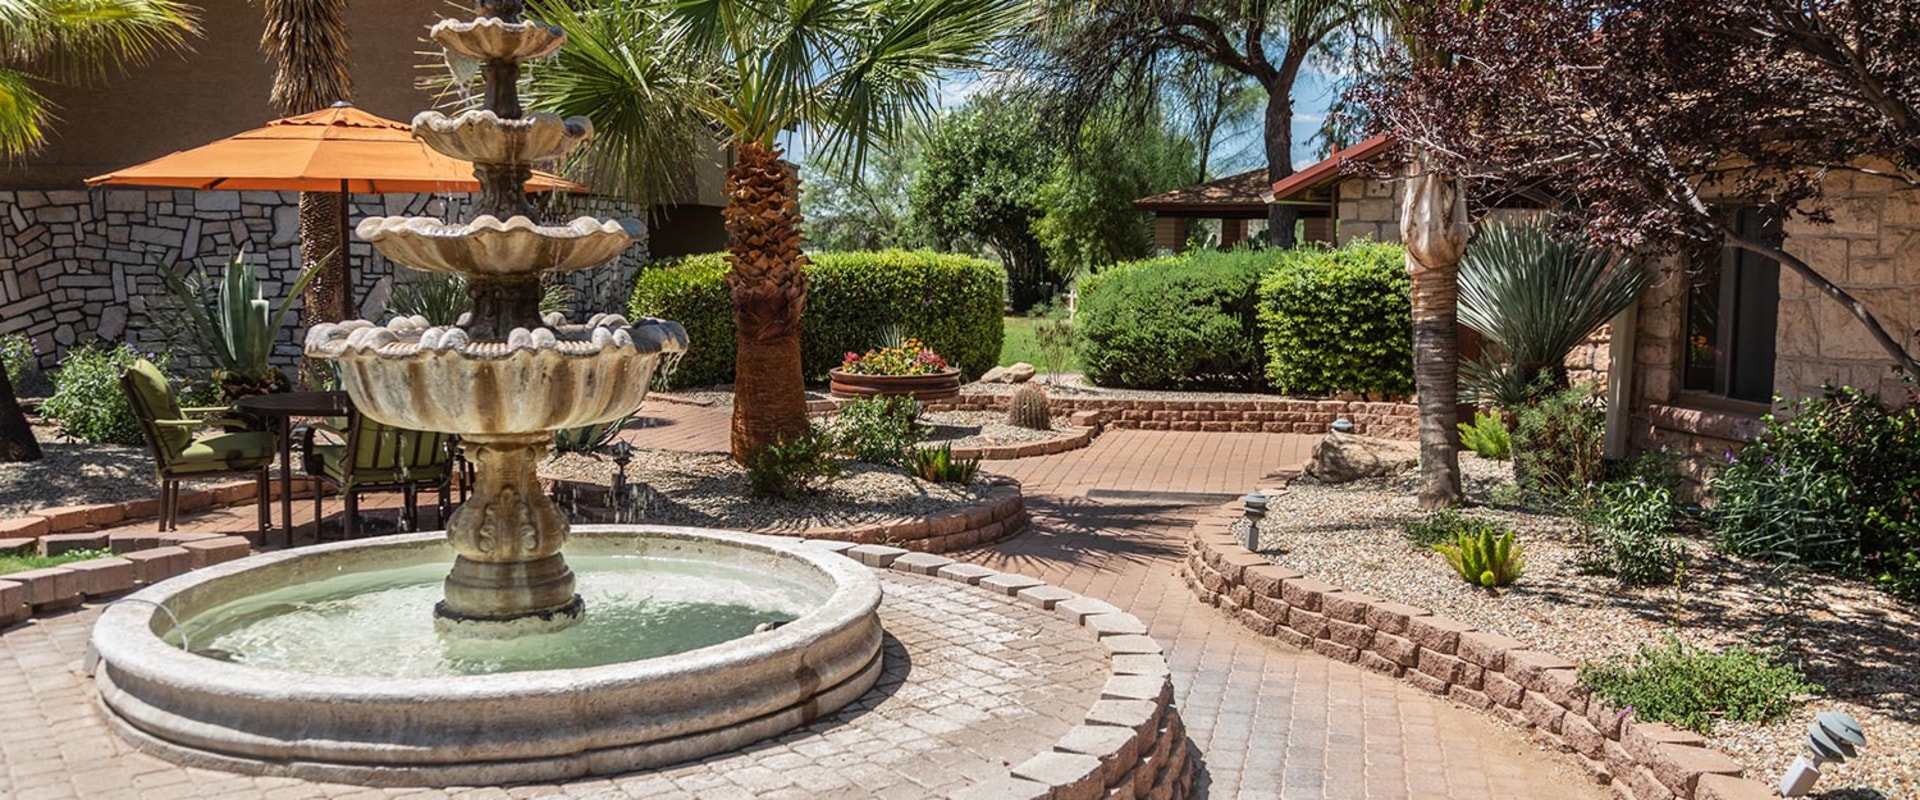 The Importance of Amenities in Addiction Treatment: A Look at Treatment Centers in Phoenix, AZ